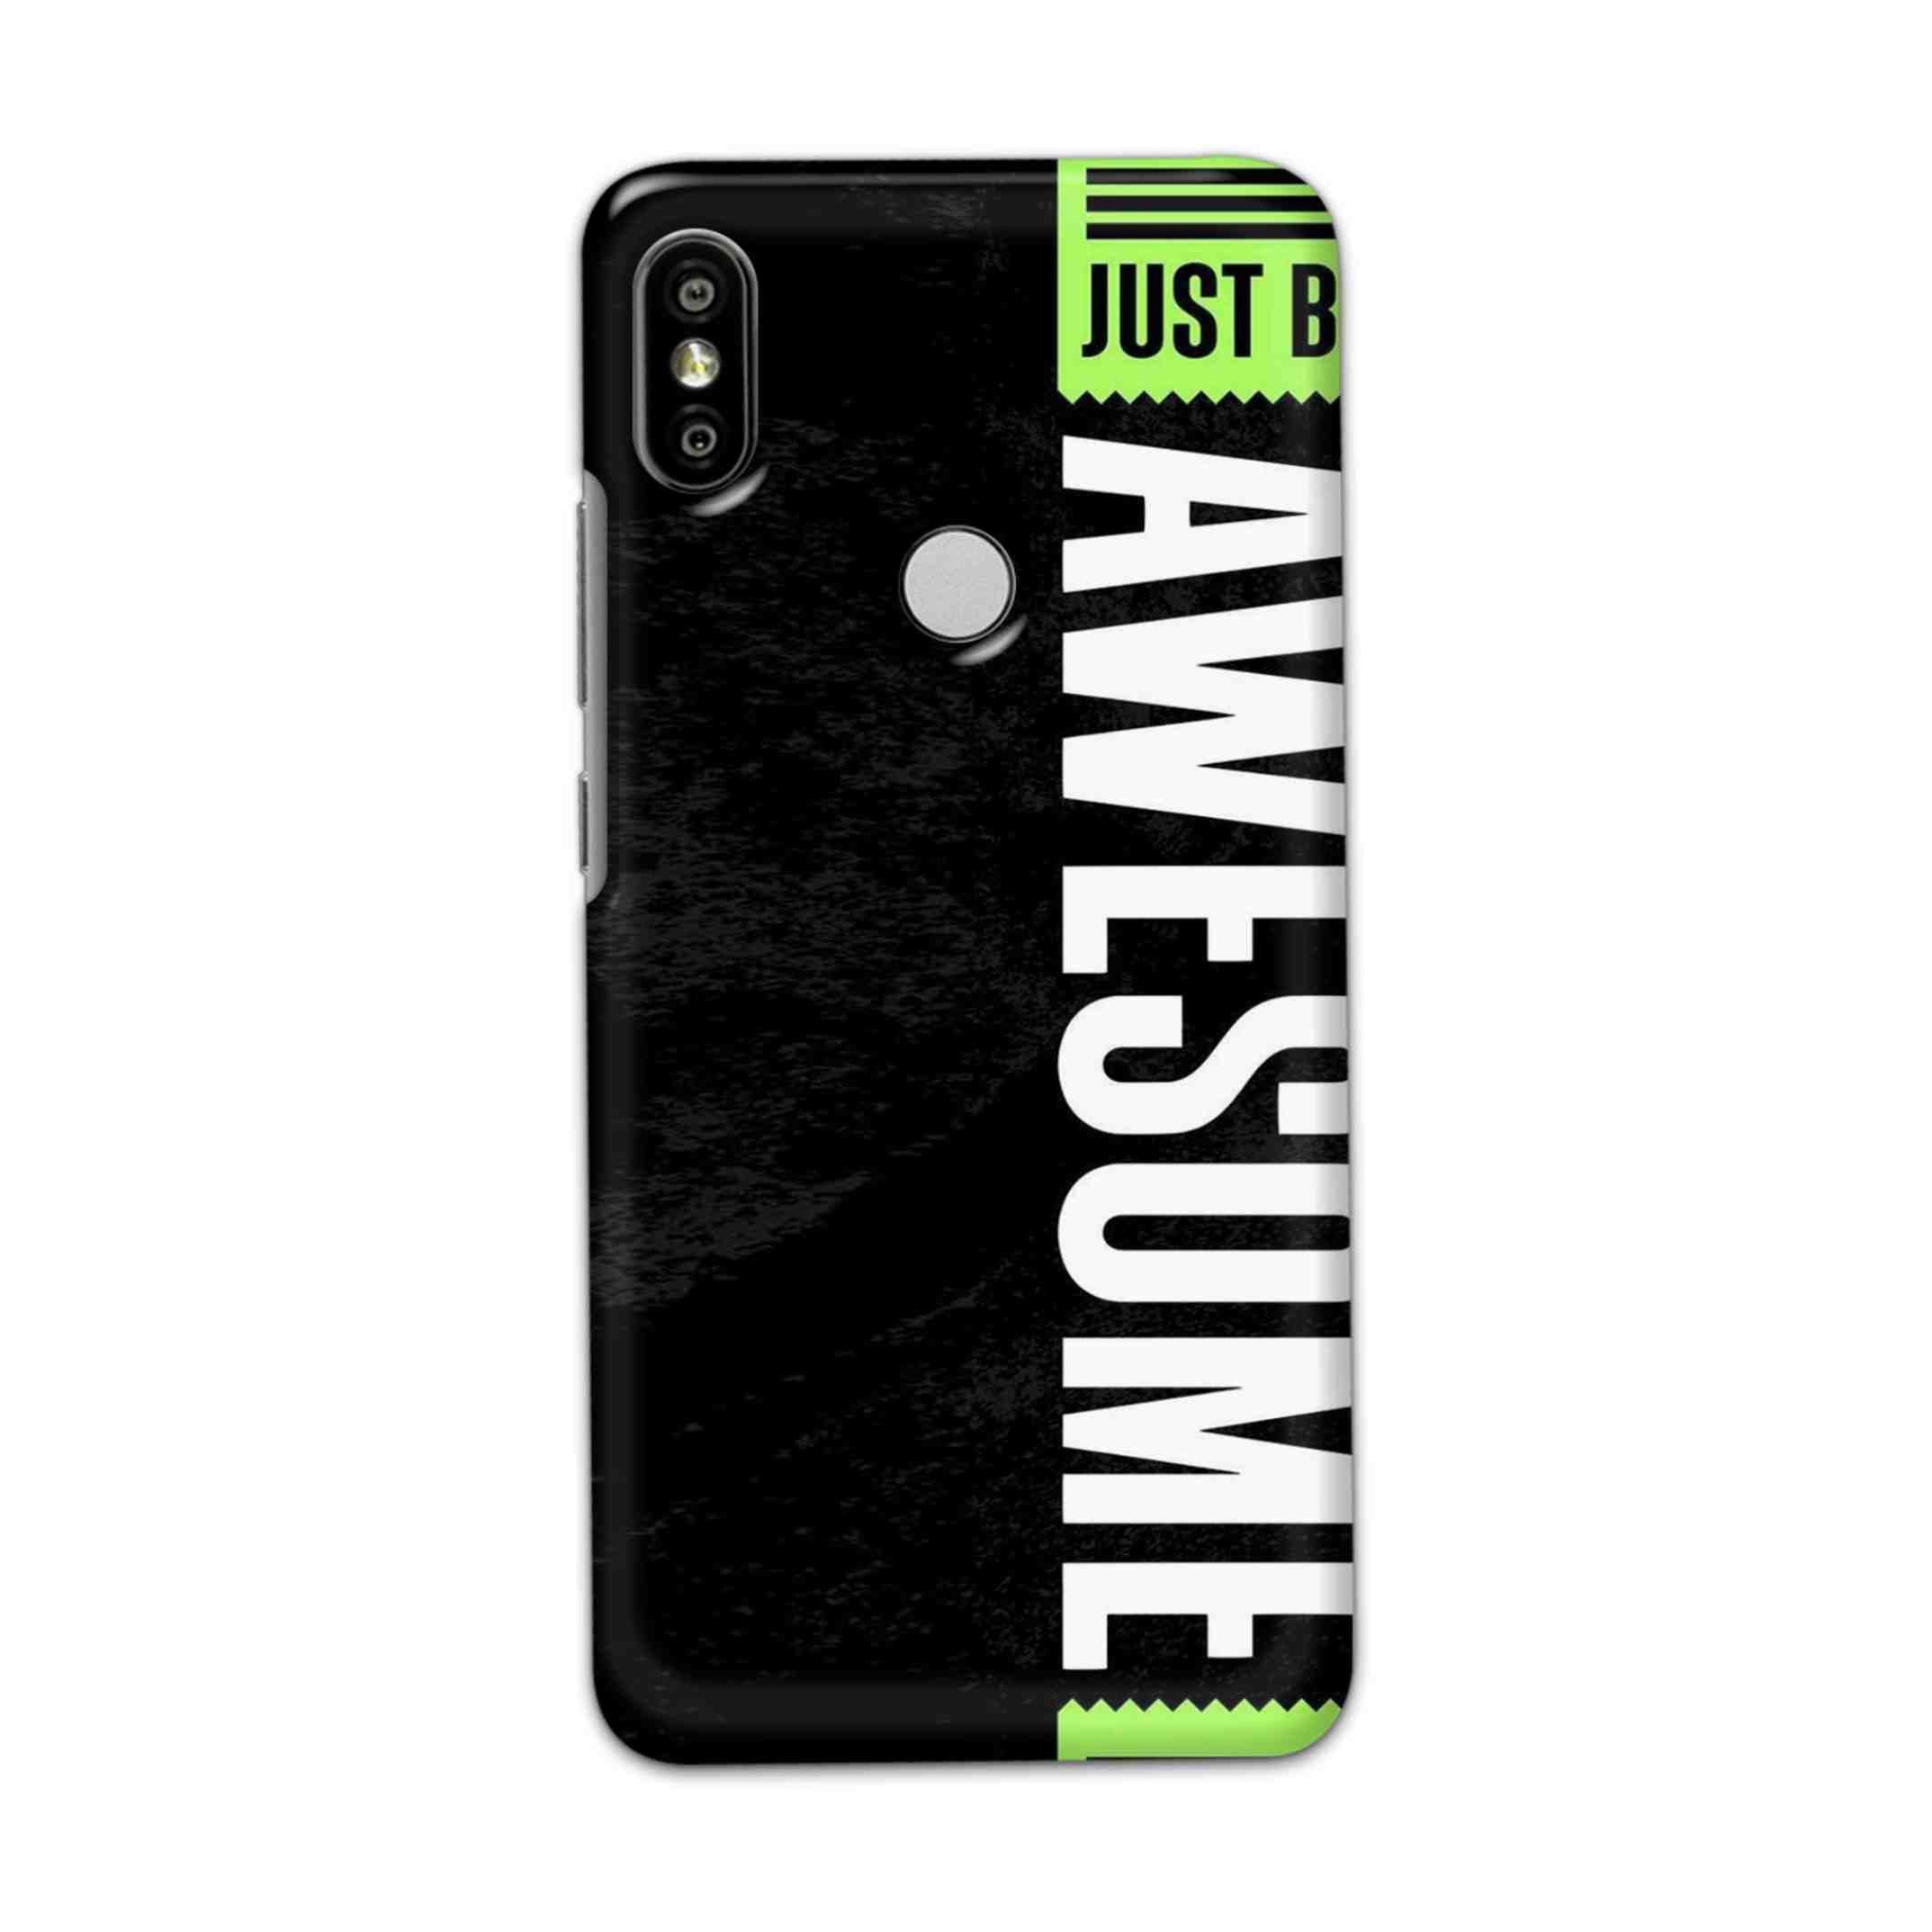 Buy Awesome Street Hard Back Mobile Phone Case Cover For Redmi S2 / Y2 Online